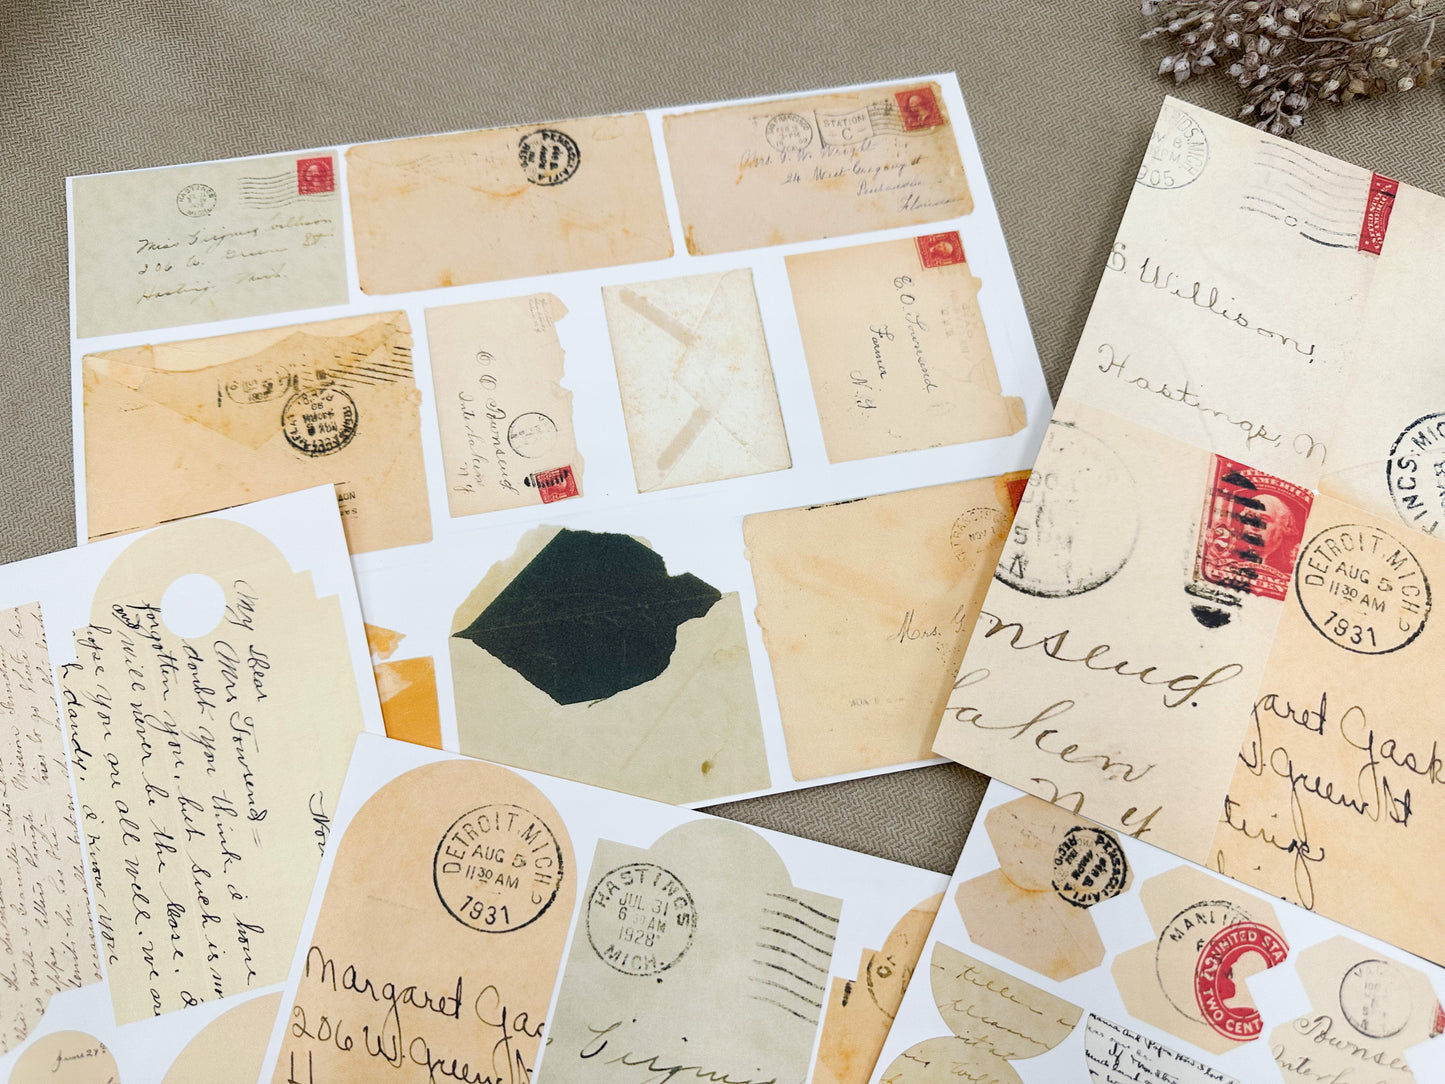 Reproduction Tags, Tabs, and Pockets- Letters and Envelopes